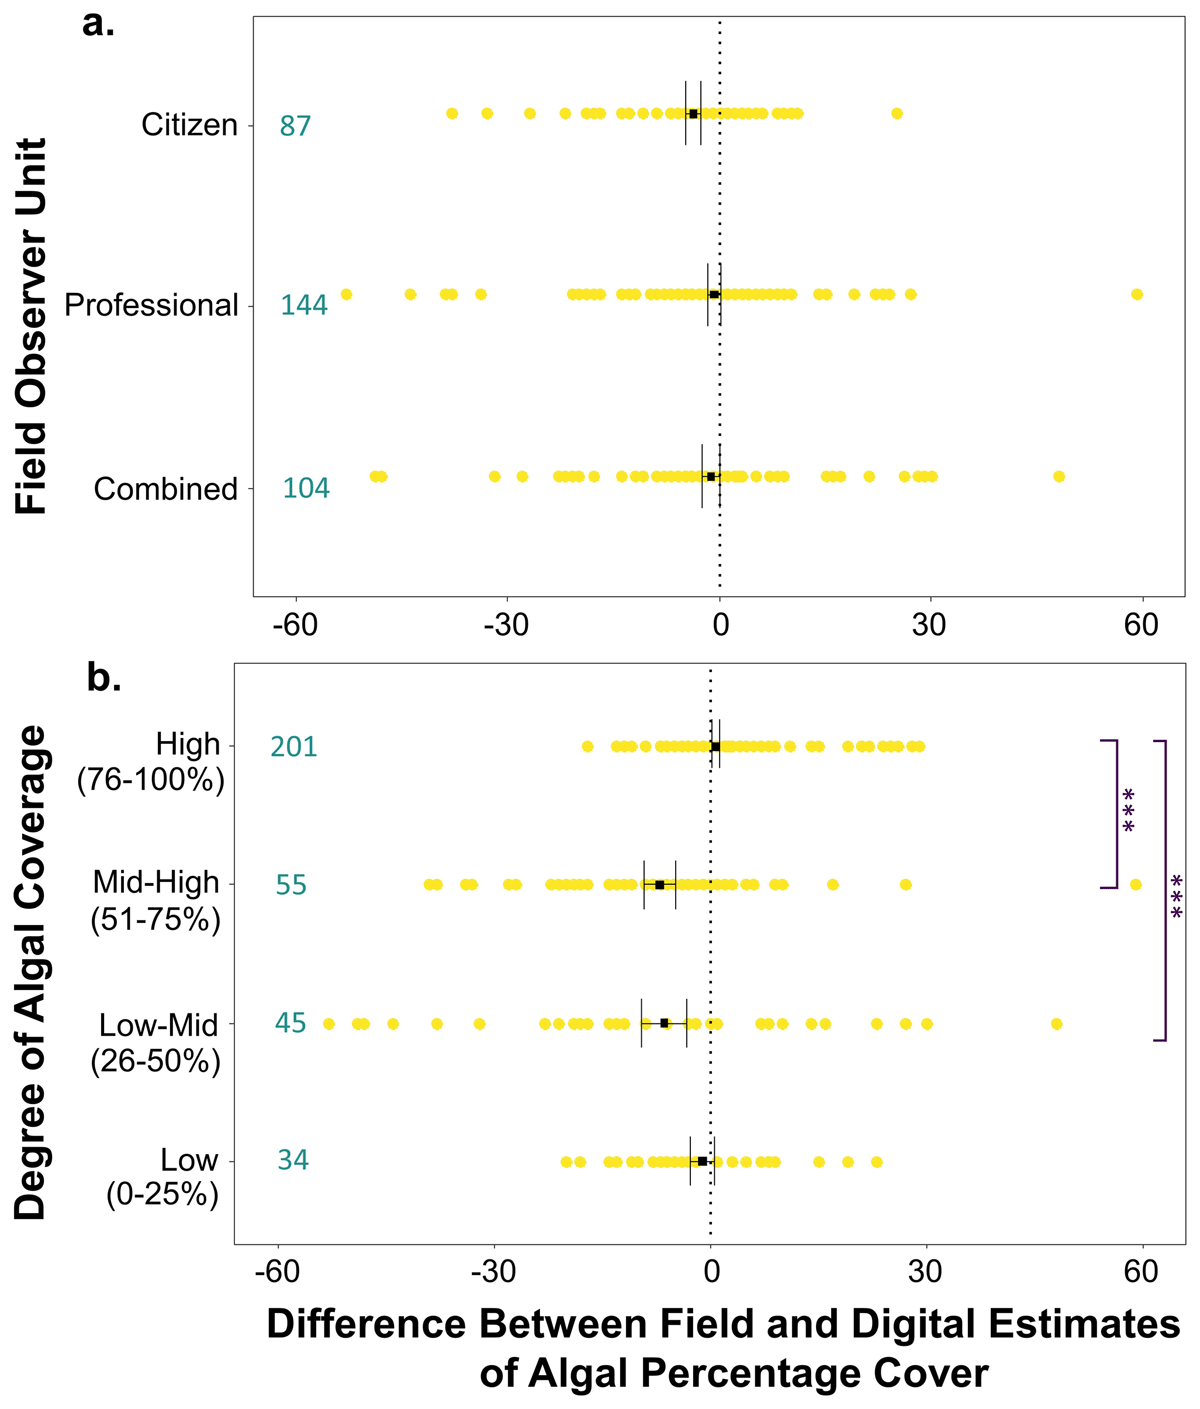 Two graphs showing differences between field and digital baseline estimates of algal percentage cover. Graph A shows differences across the different types of observer units (citizen scientists, professional scientists, and combined units). Graph B (at the bottom of the figure) shows differences across different levels of algal cover (low, low-mid, high-mid and high)